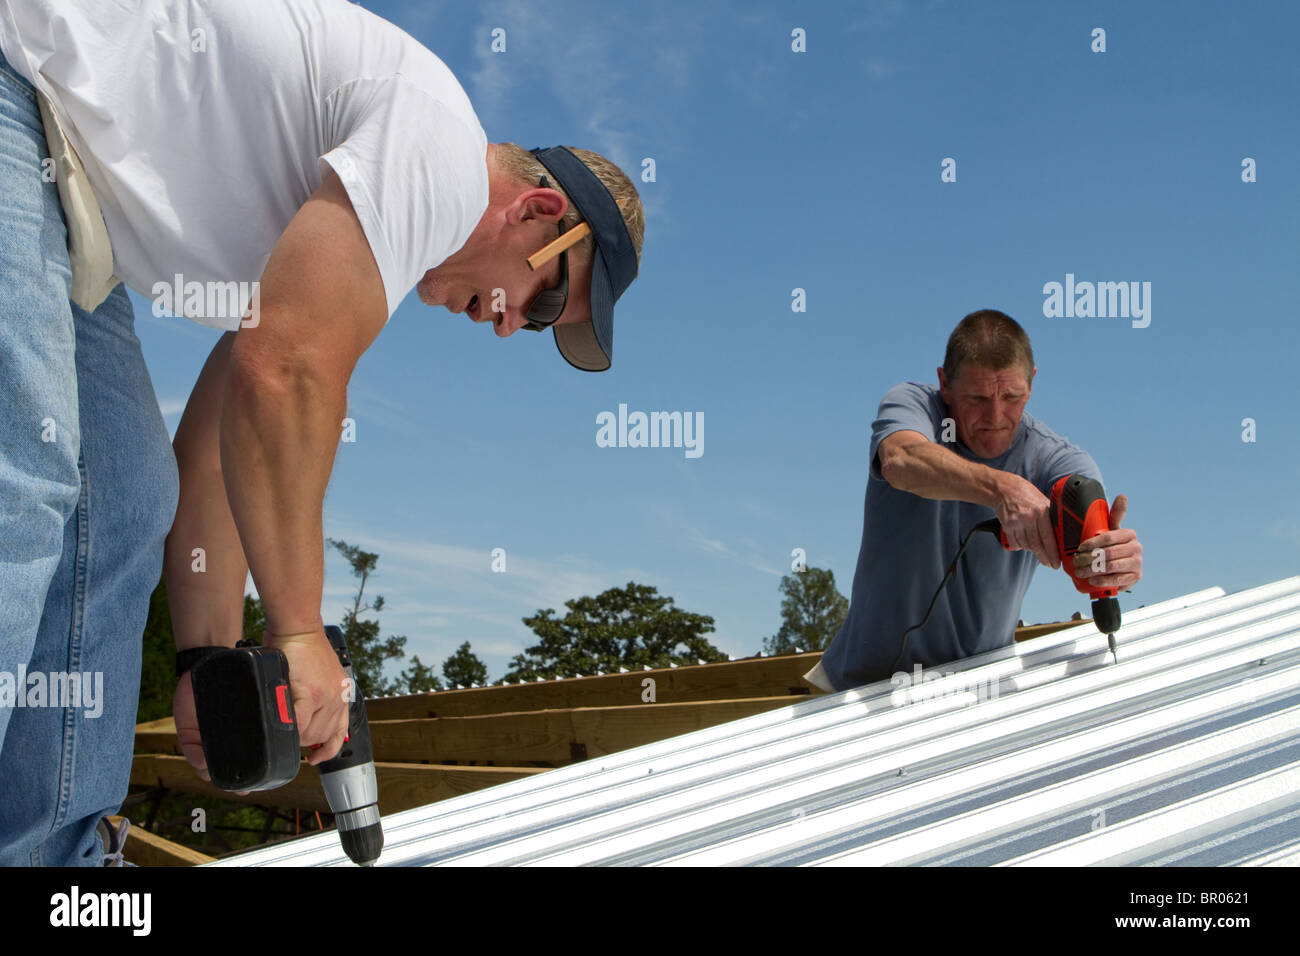 Construction roofing crew uses power tools to screw and fasten sheet metal to the roof rafters of a building. Stock Photo